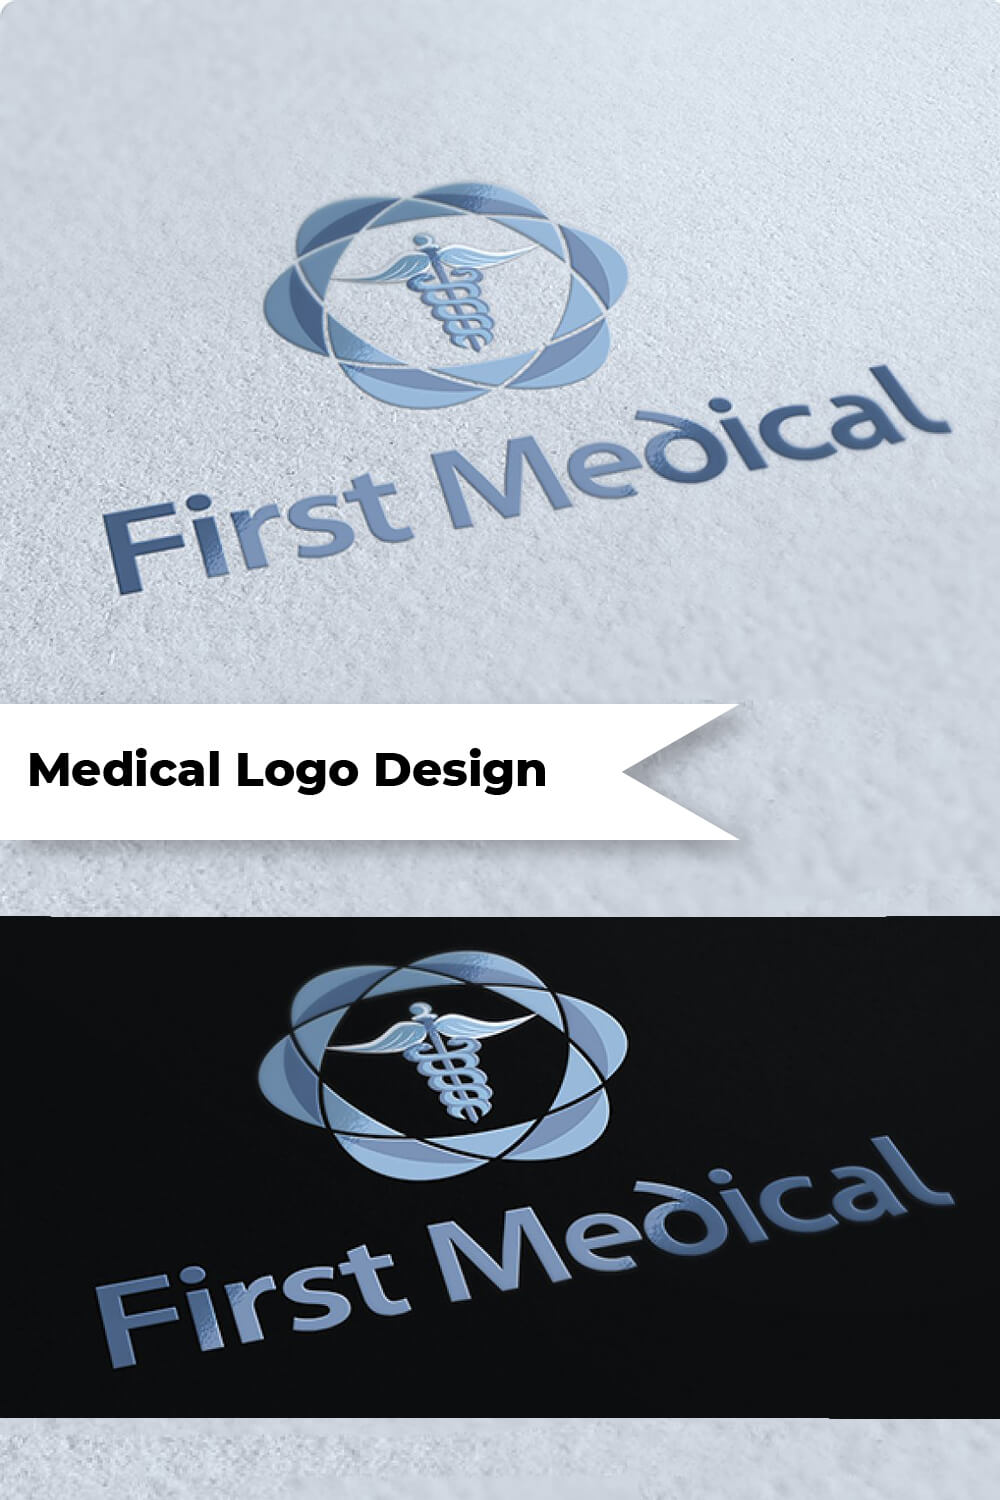 Two variants of the medical logo design on a light and dark background.